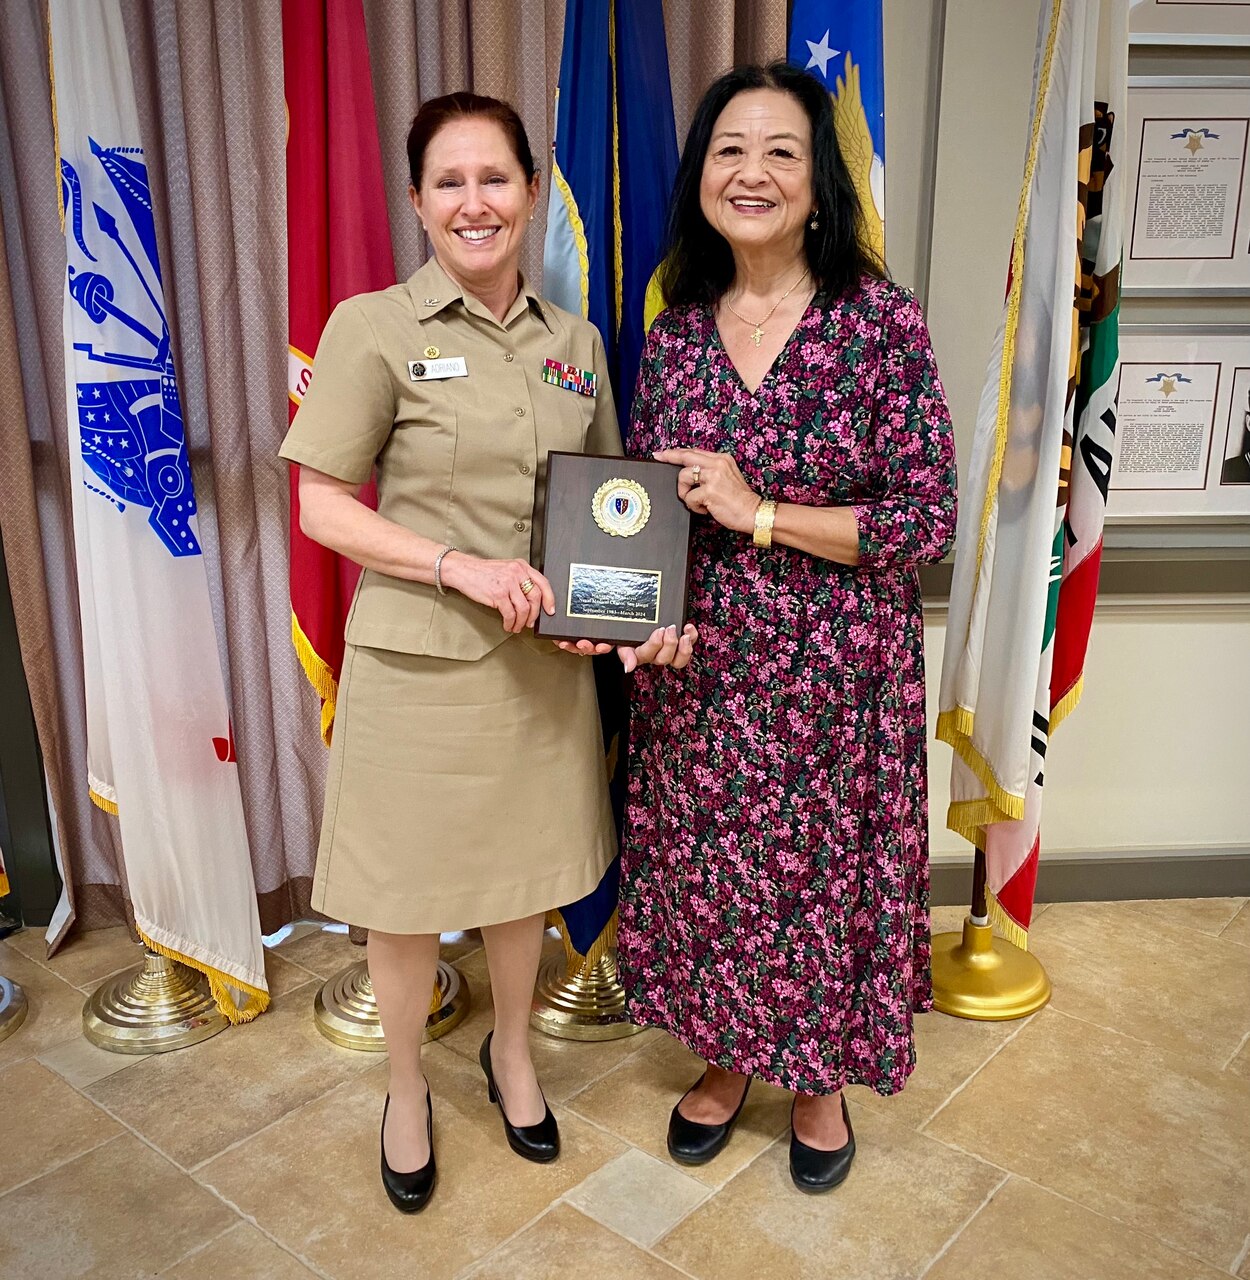 SAN DIEGO (March 22, 2024)  Capt. Elizabeth Adriano, left, Naval Medical Center San Diego (NMCSD) director, presents Valorie Braun, NMCSD Human Resources Department management analyst, with a 40 year Length of Service plaque, March 22, 2024.  Braun is schedule to retire in 2024.  The mission of NMCSD is to prepare service members to deploy in support of operational forces, deliver high quality health care services, and shape the future of military medicine through education, training, and research. NMCSD employs more than 5,000 active-duty military personnel, civilians and contractors in southern California to provide patients with world-class care.  Anchored in Excellence, Committed to Health!